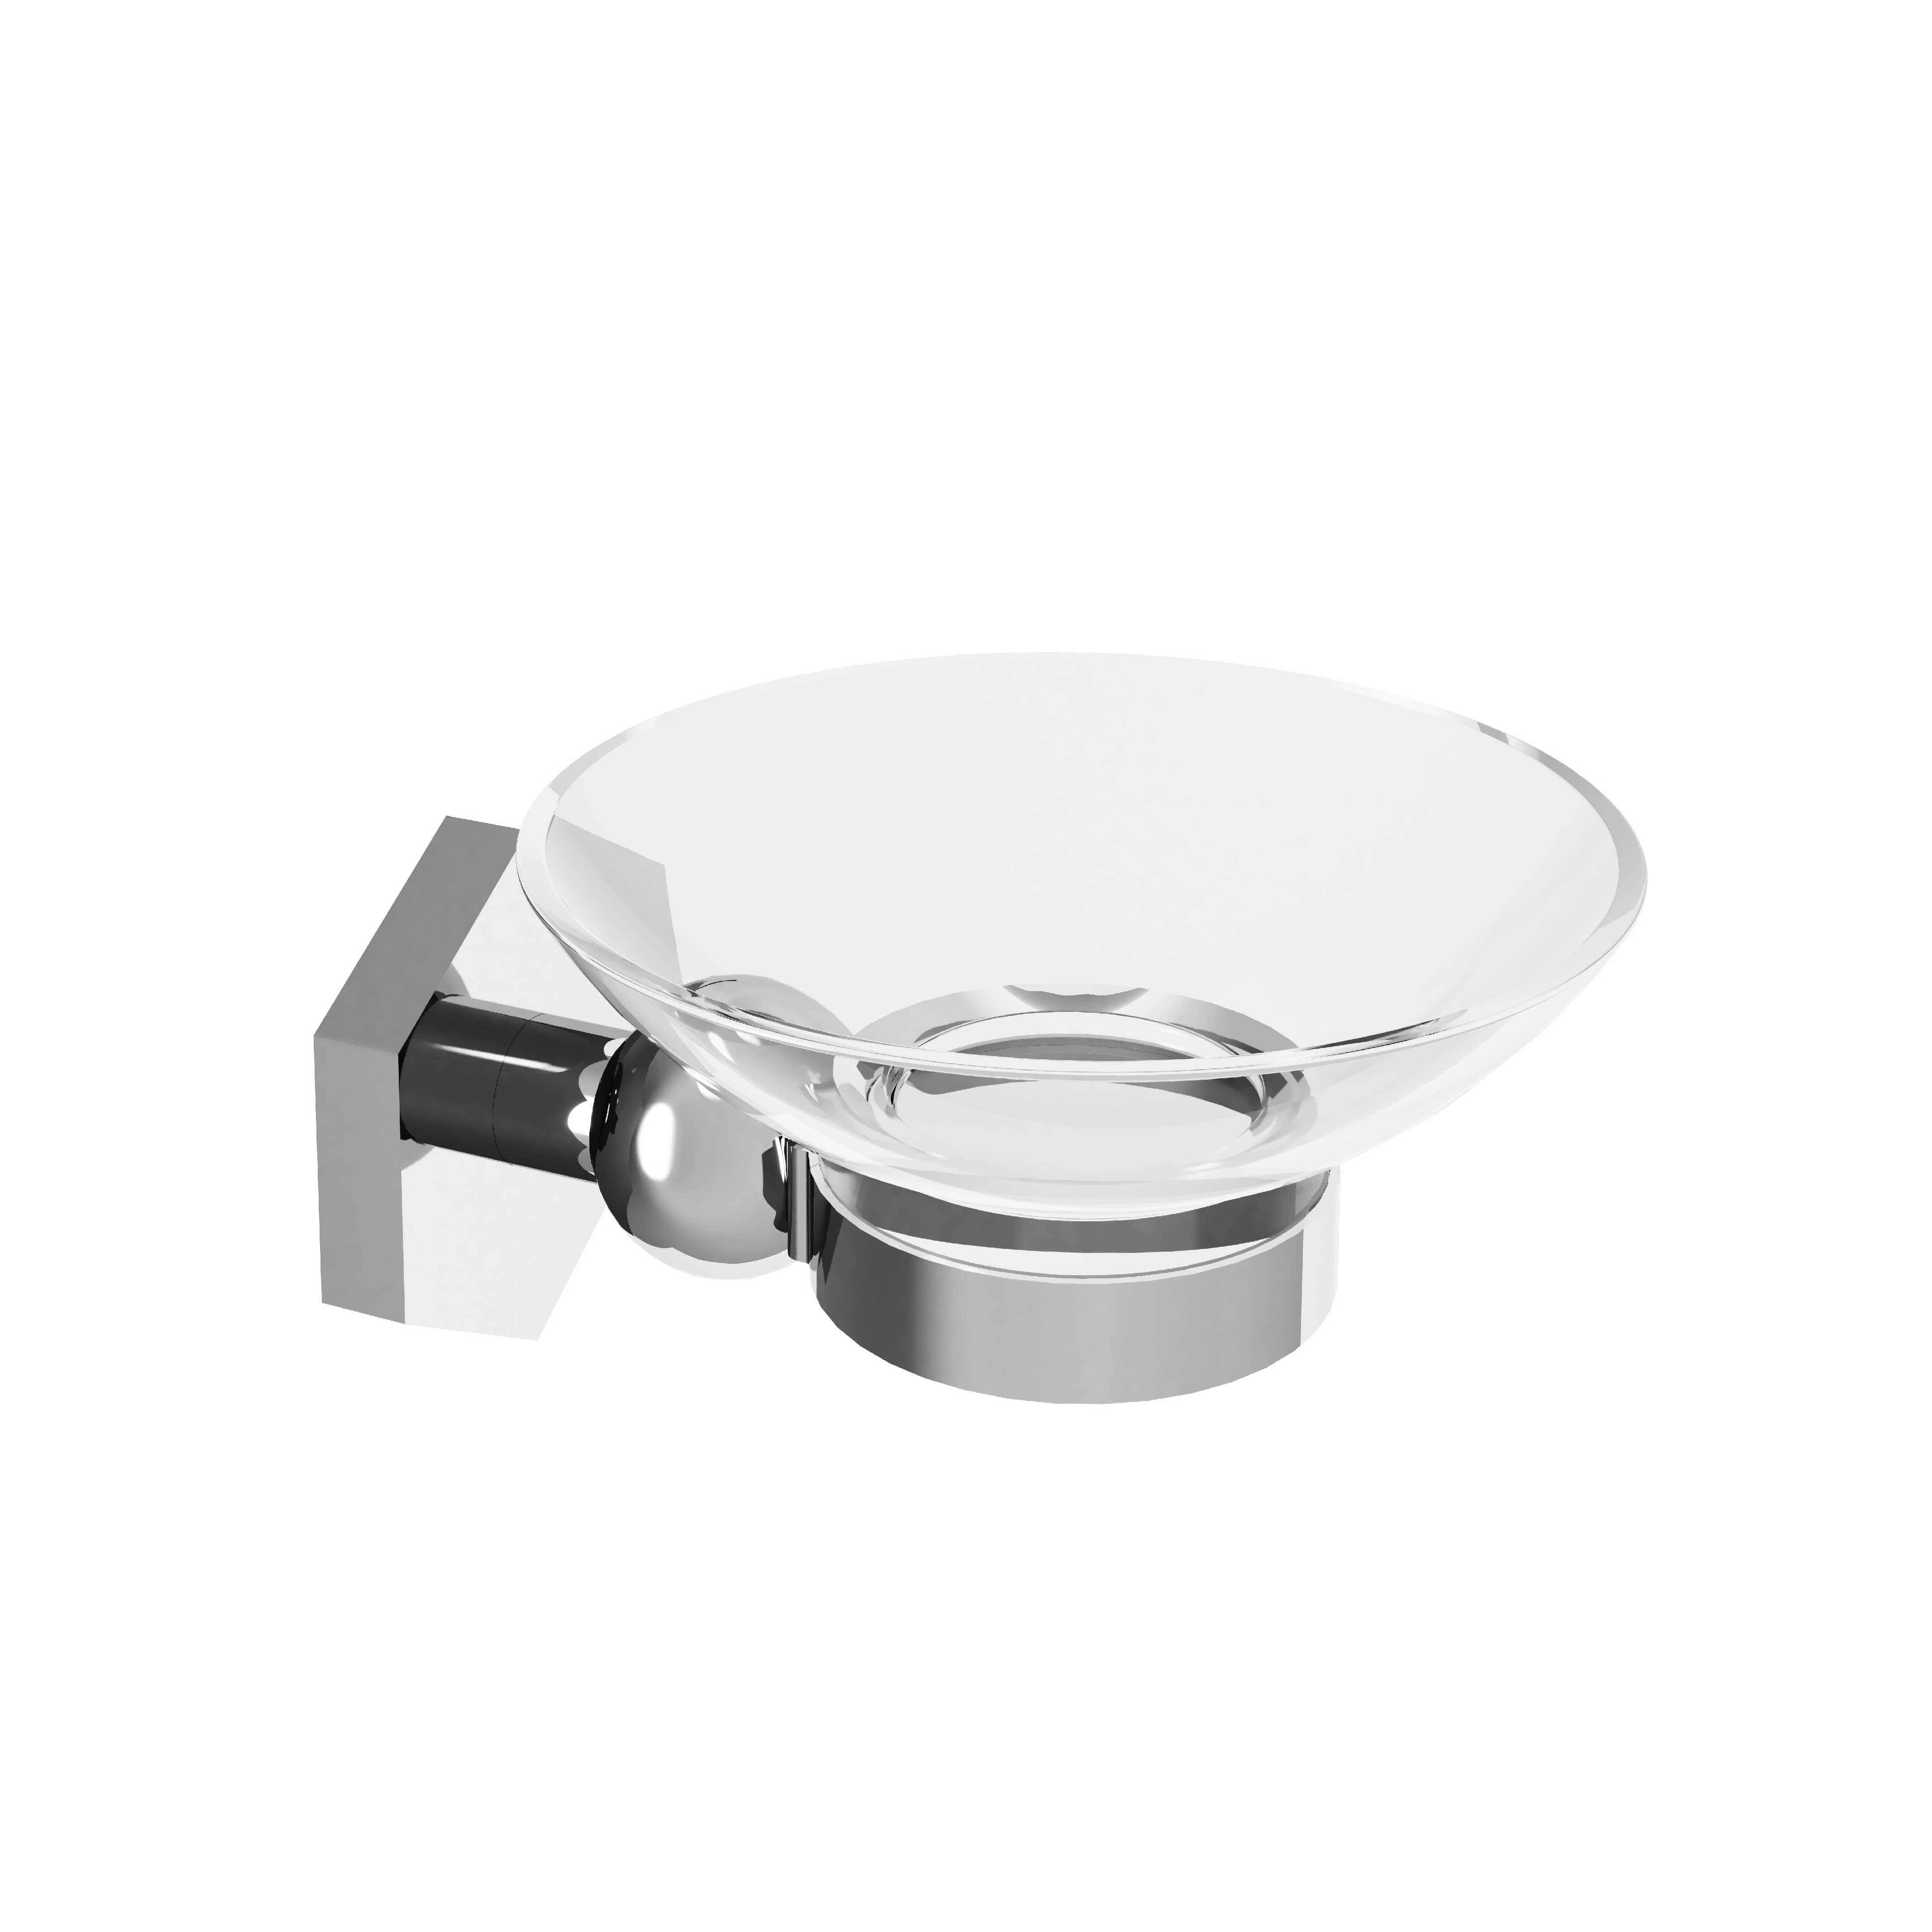 M39-515 Wall mounted soap dish holder